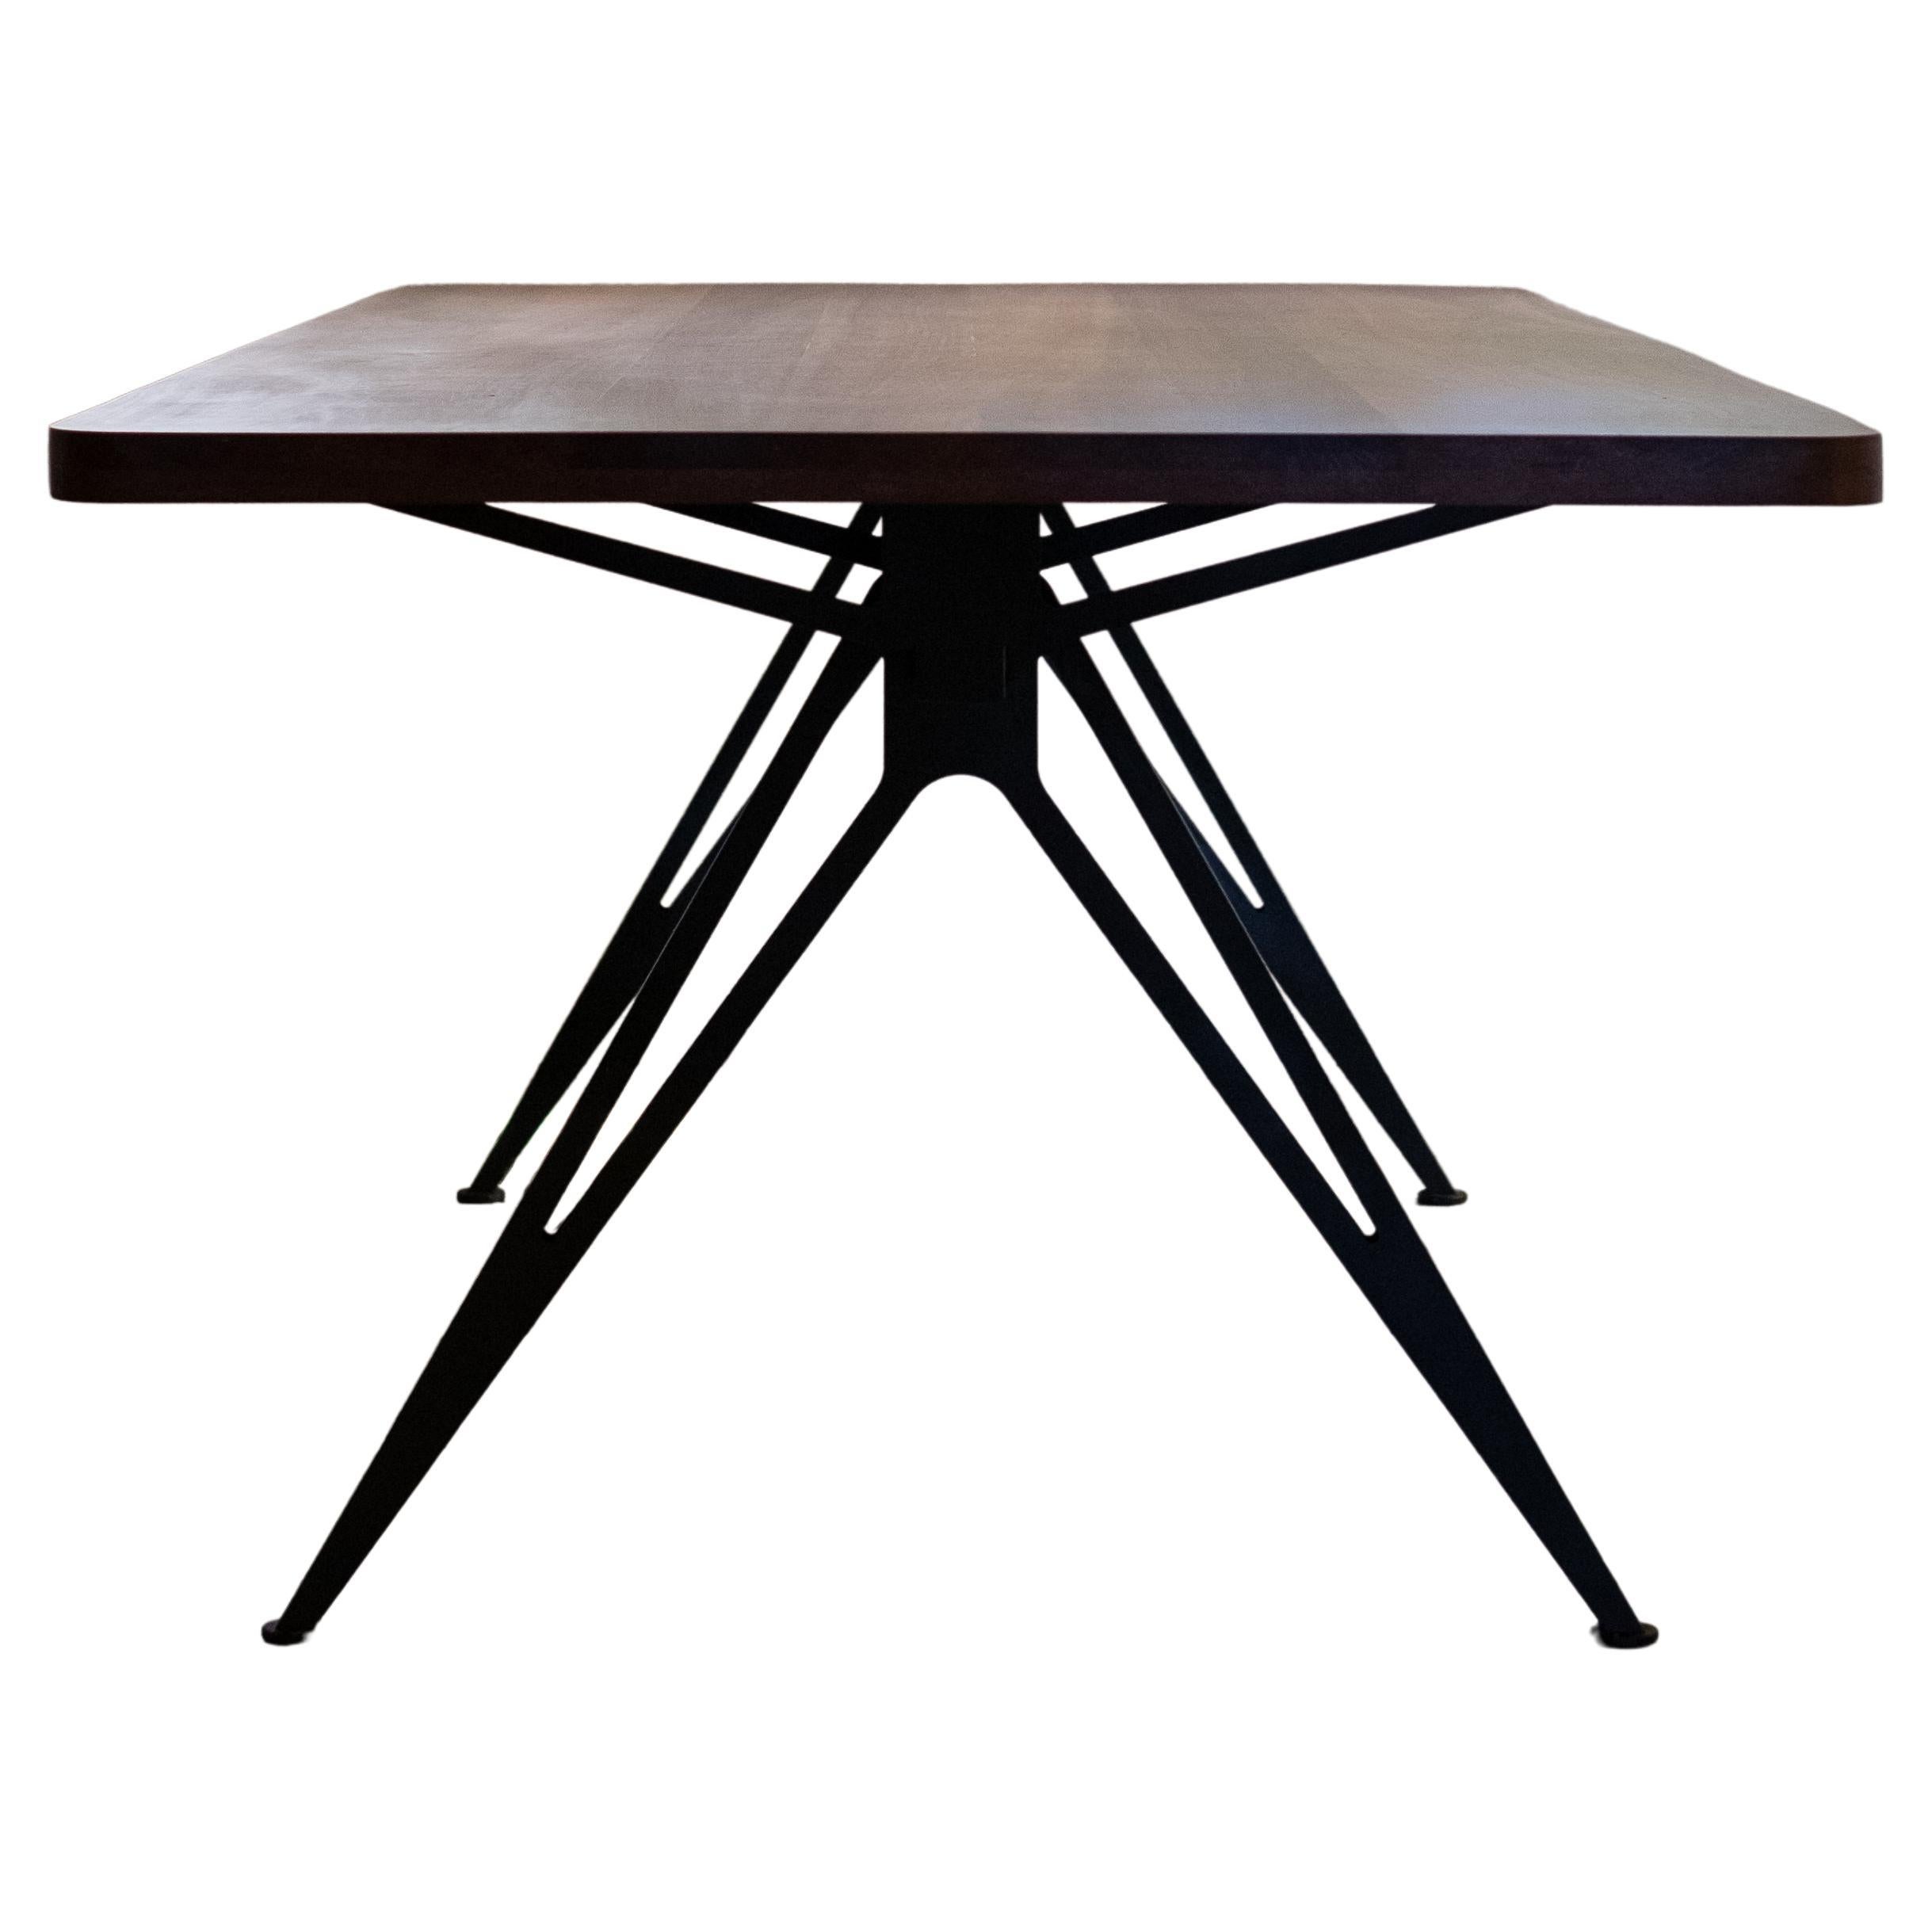 Spine Table with wooden top and black steel base by Manna Design Studio For Sale